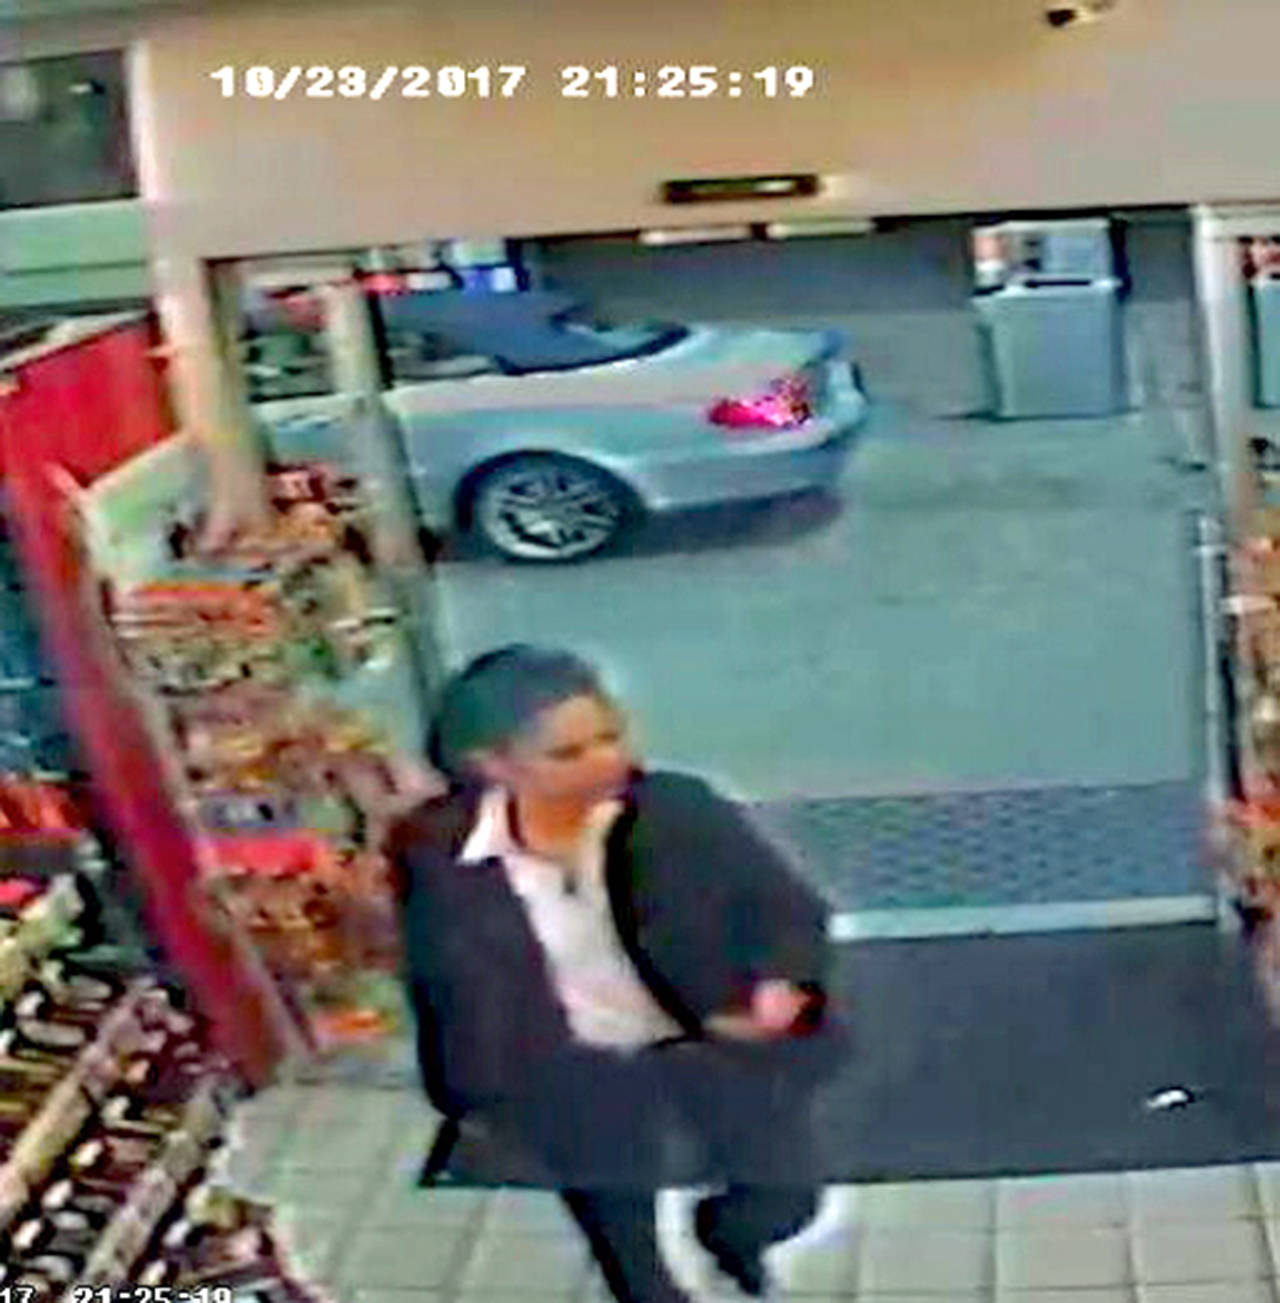 Detectives believe the same armed woman robbed two gas stations within minutes of each other Monday night on Bothell Everett Highway. (Snohomish County Sheriff’s Office)